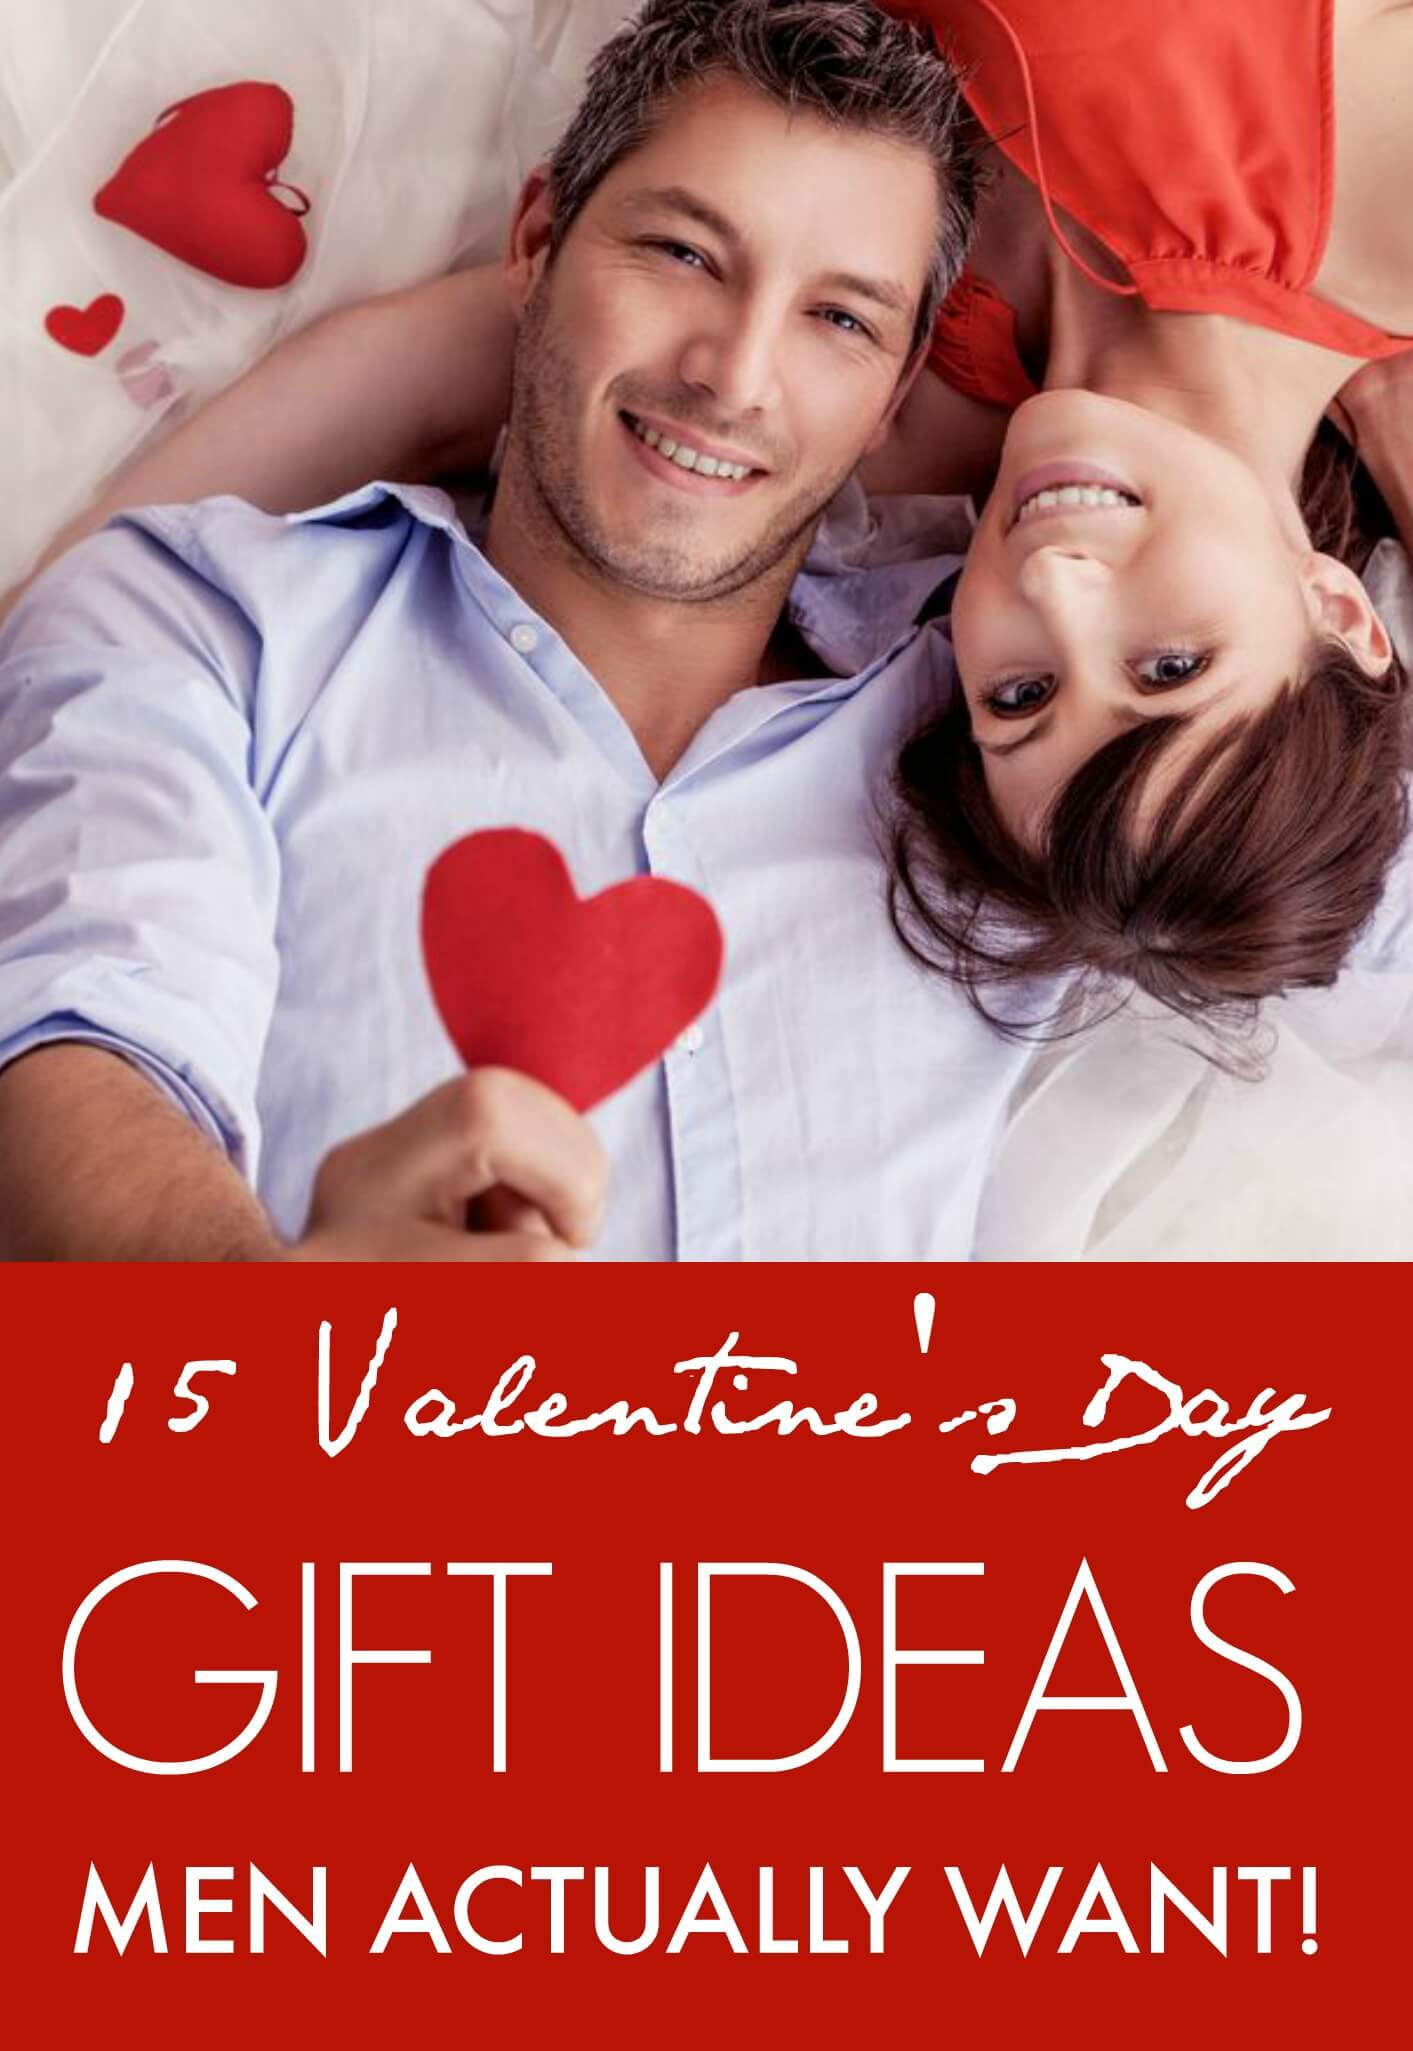 Man Valentines Gift Ideas
 15 Valentine’s Day Gift ideas Men Actually Want